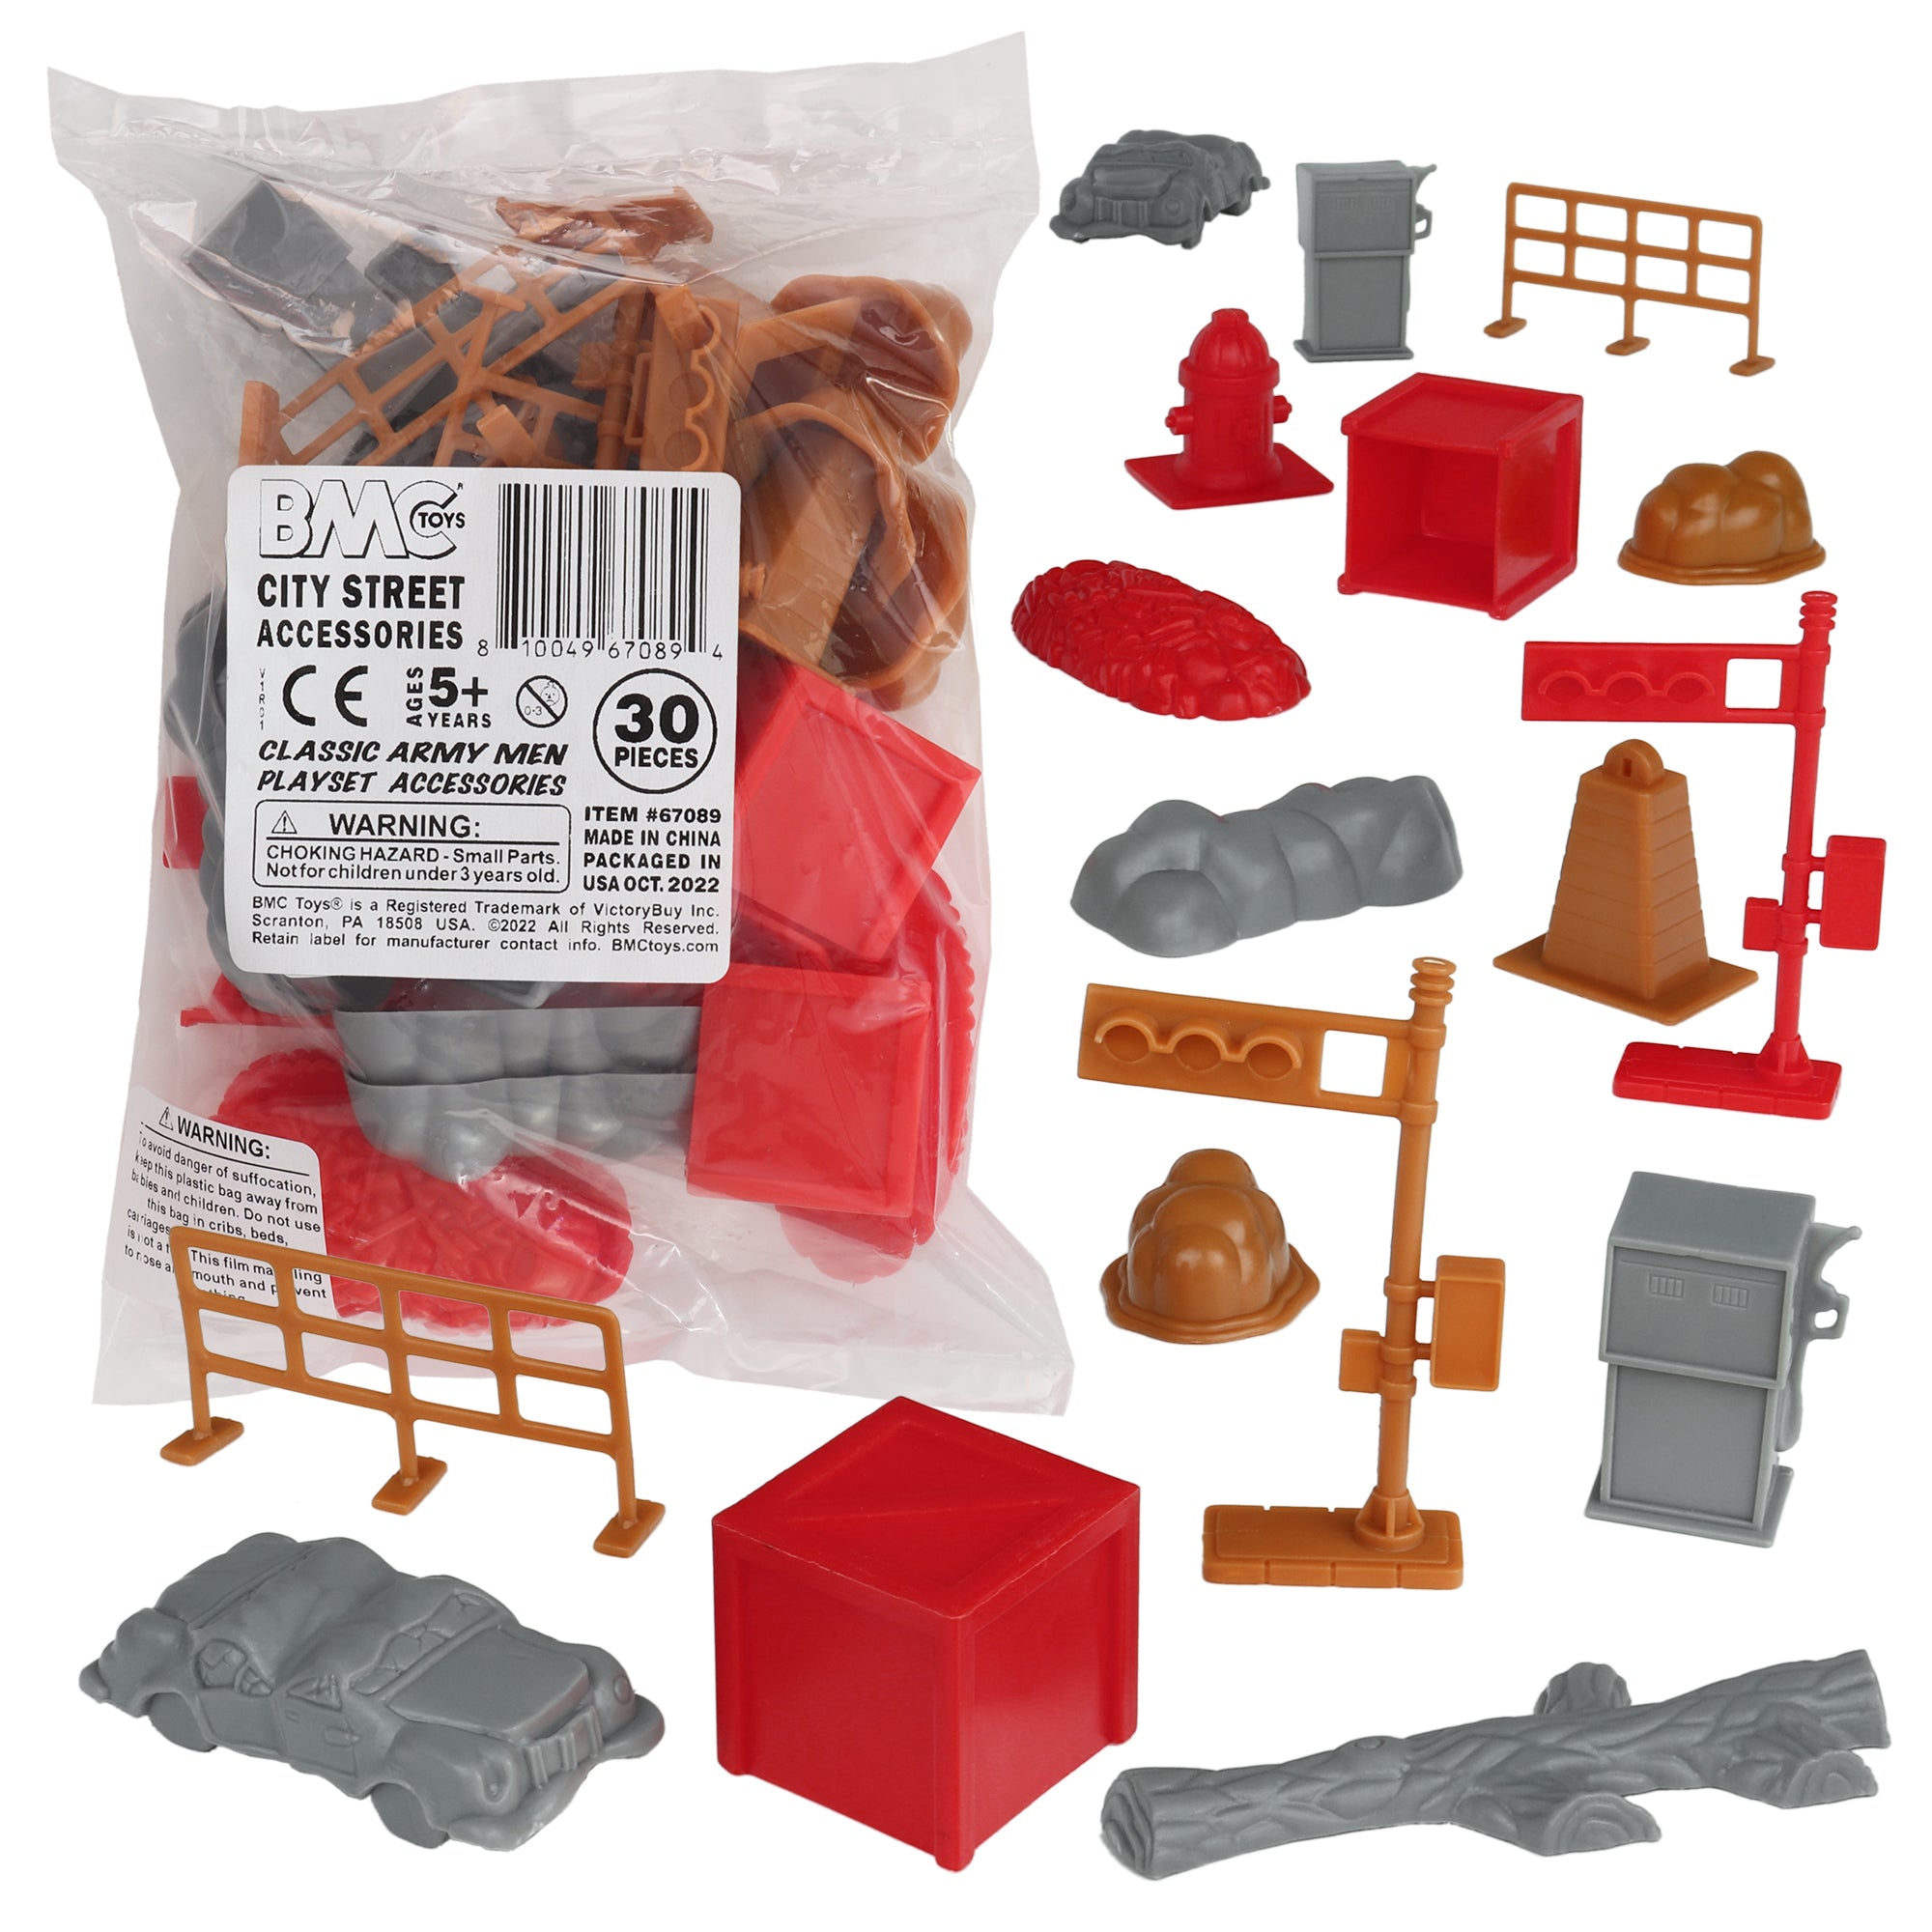 Playsets & accessories